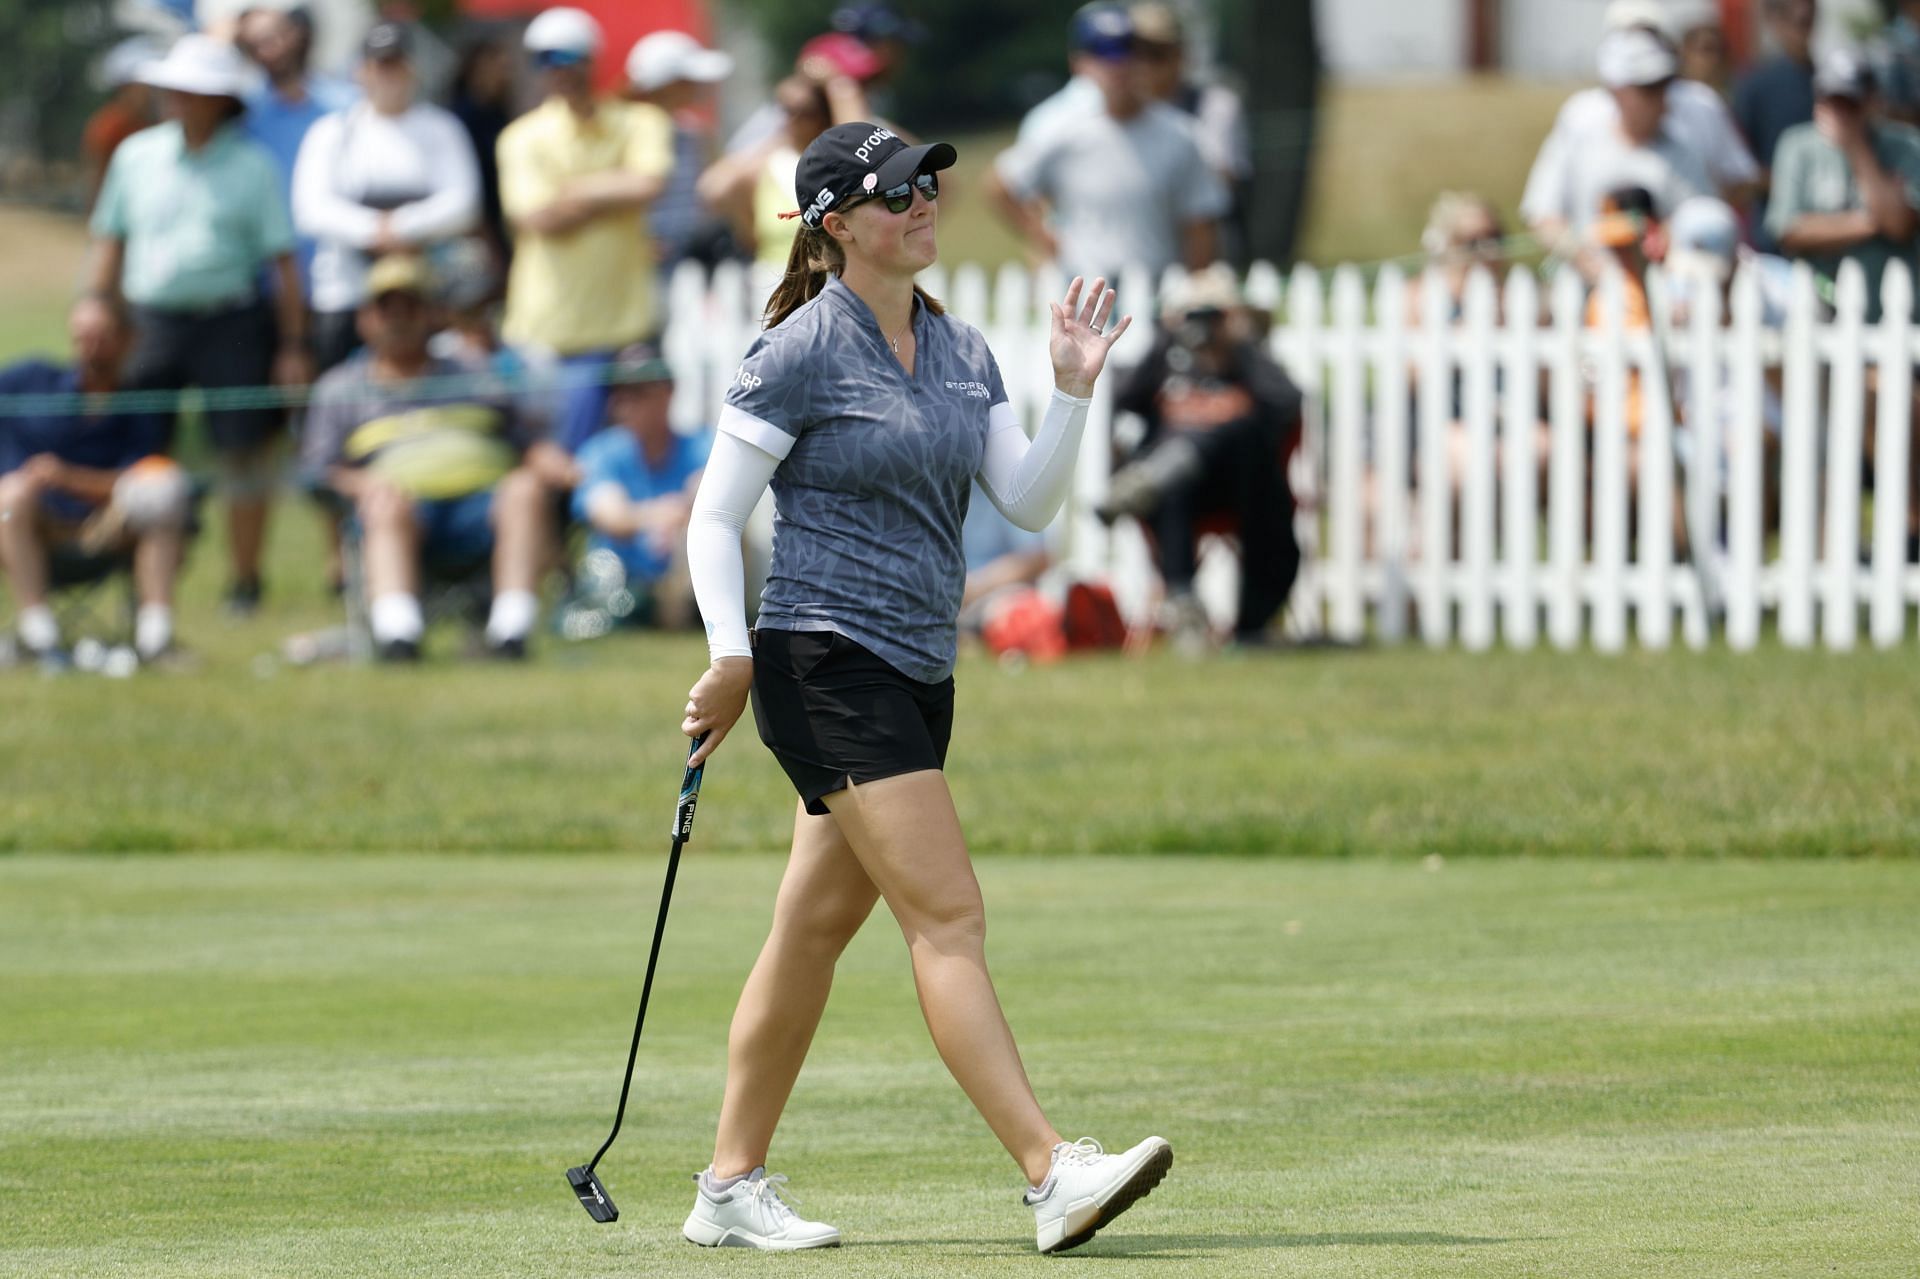 Meijer LPGA Classic for Simply Give - Final Round